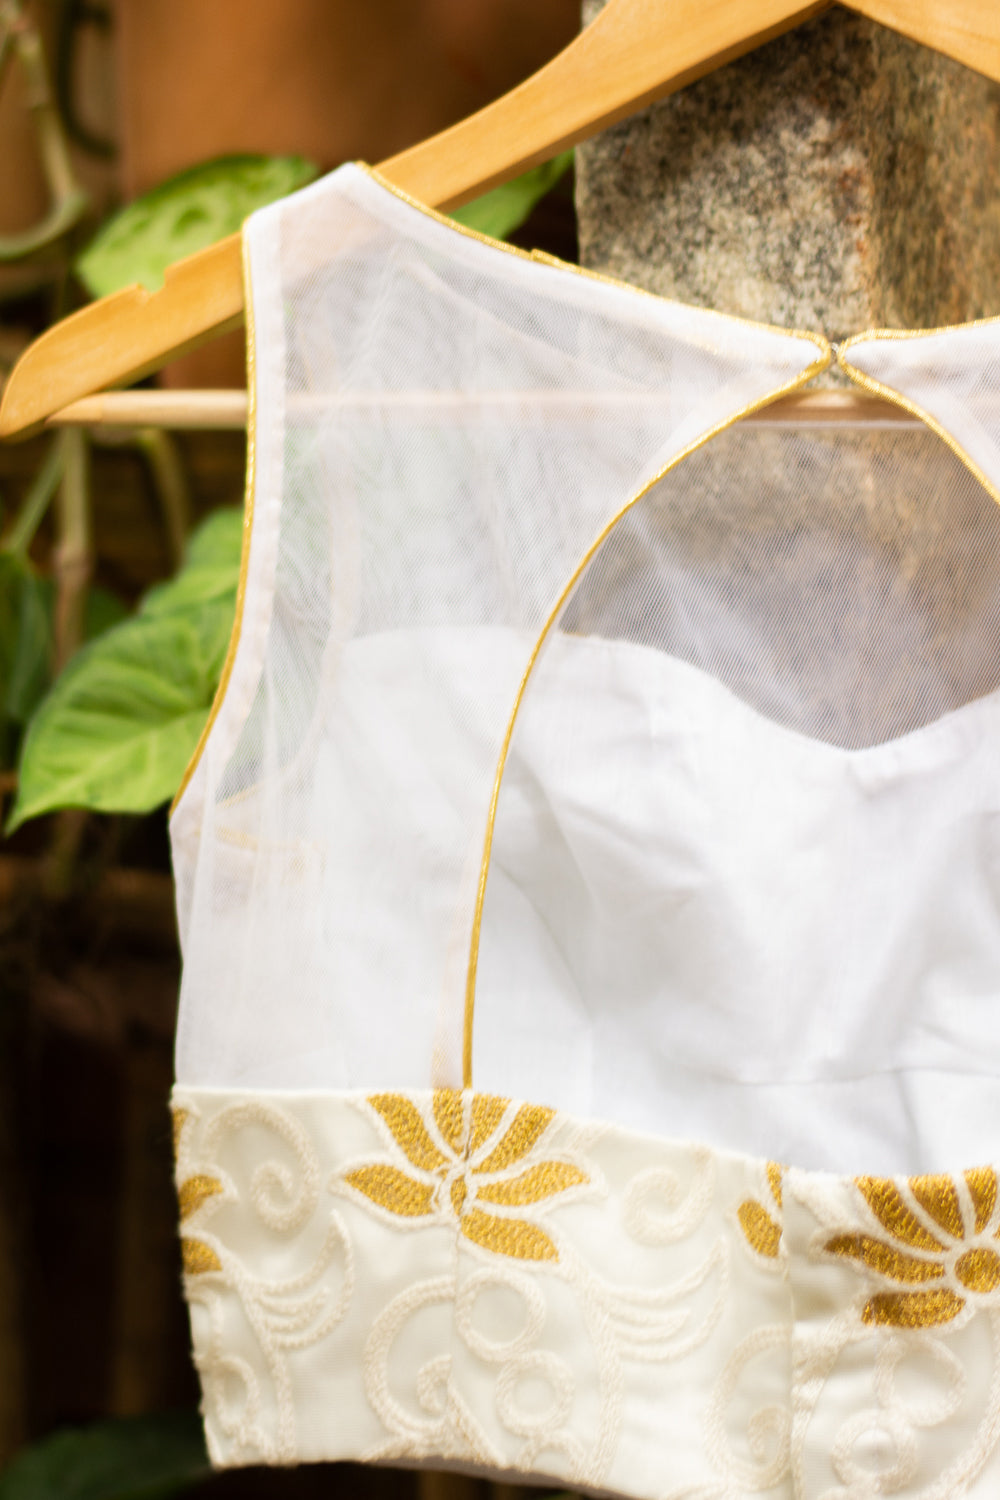 White sheer yoke blouse with lotus threadwork on net and gold piping - House of Blouse